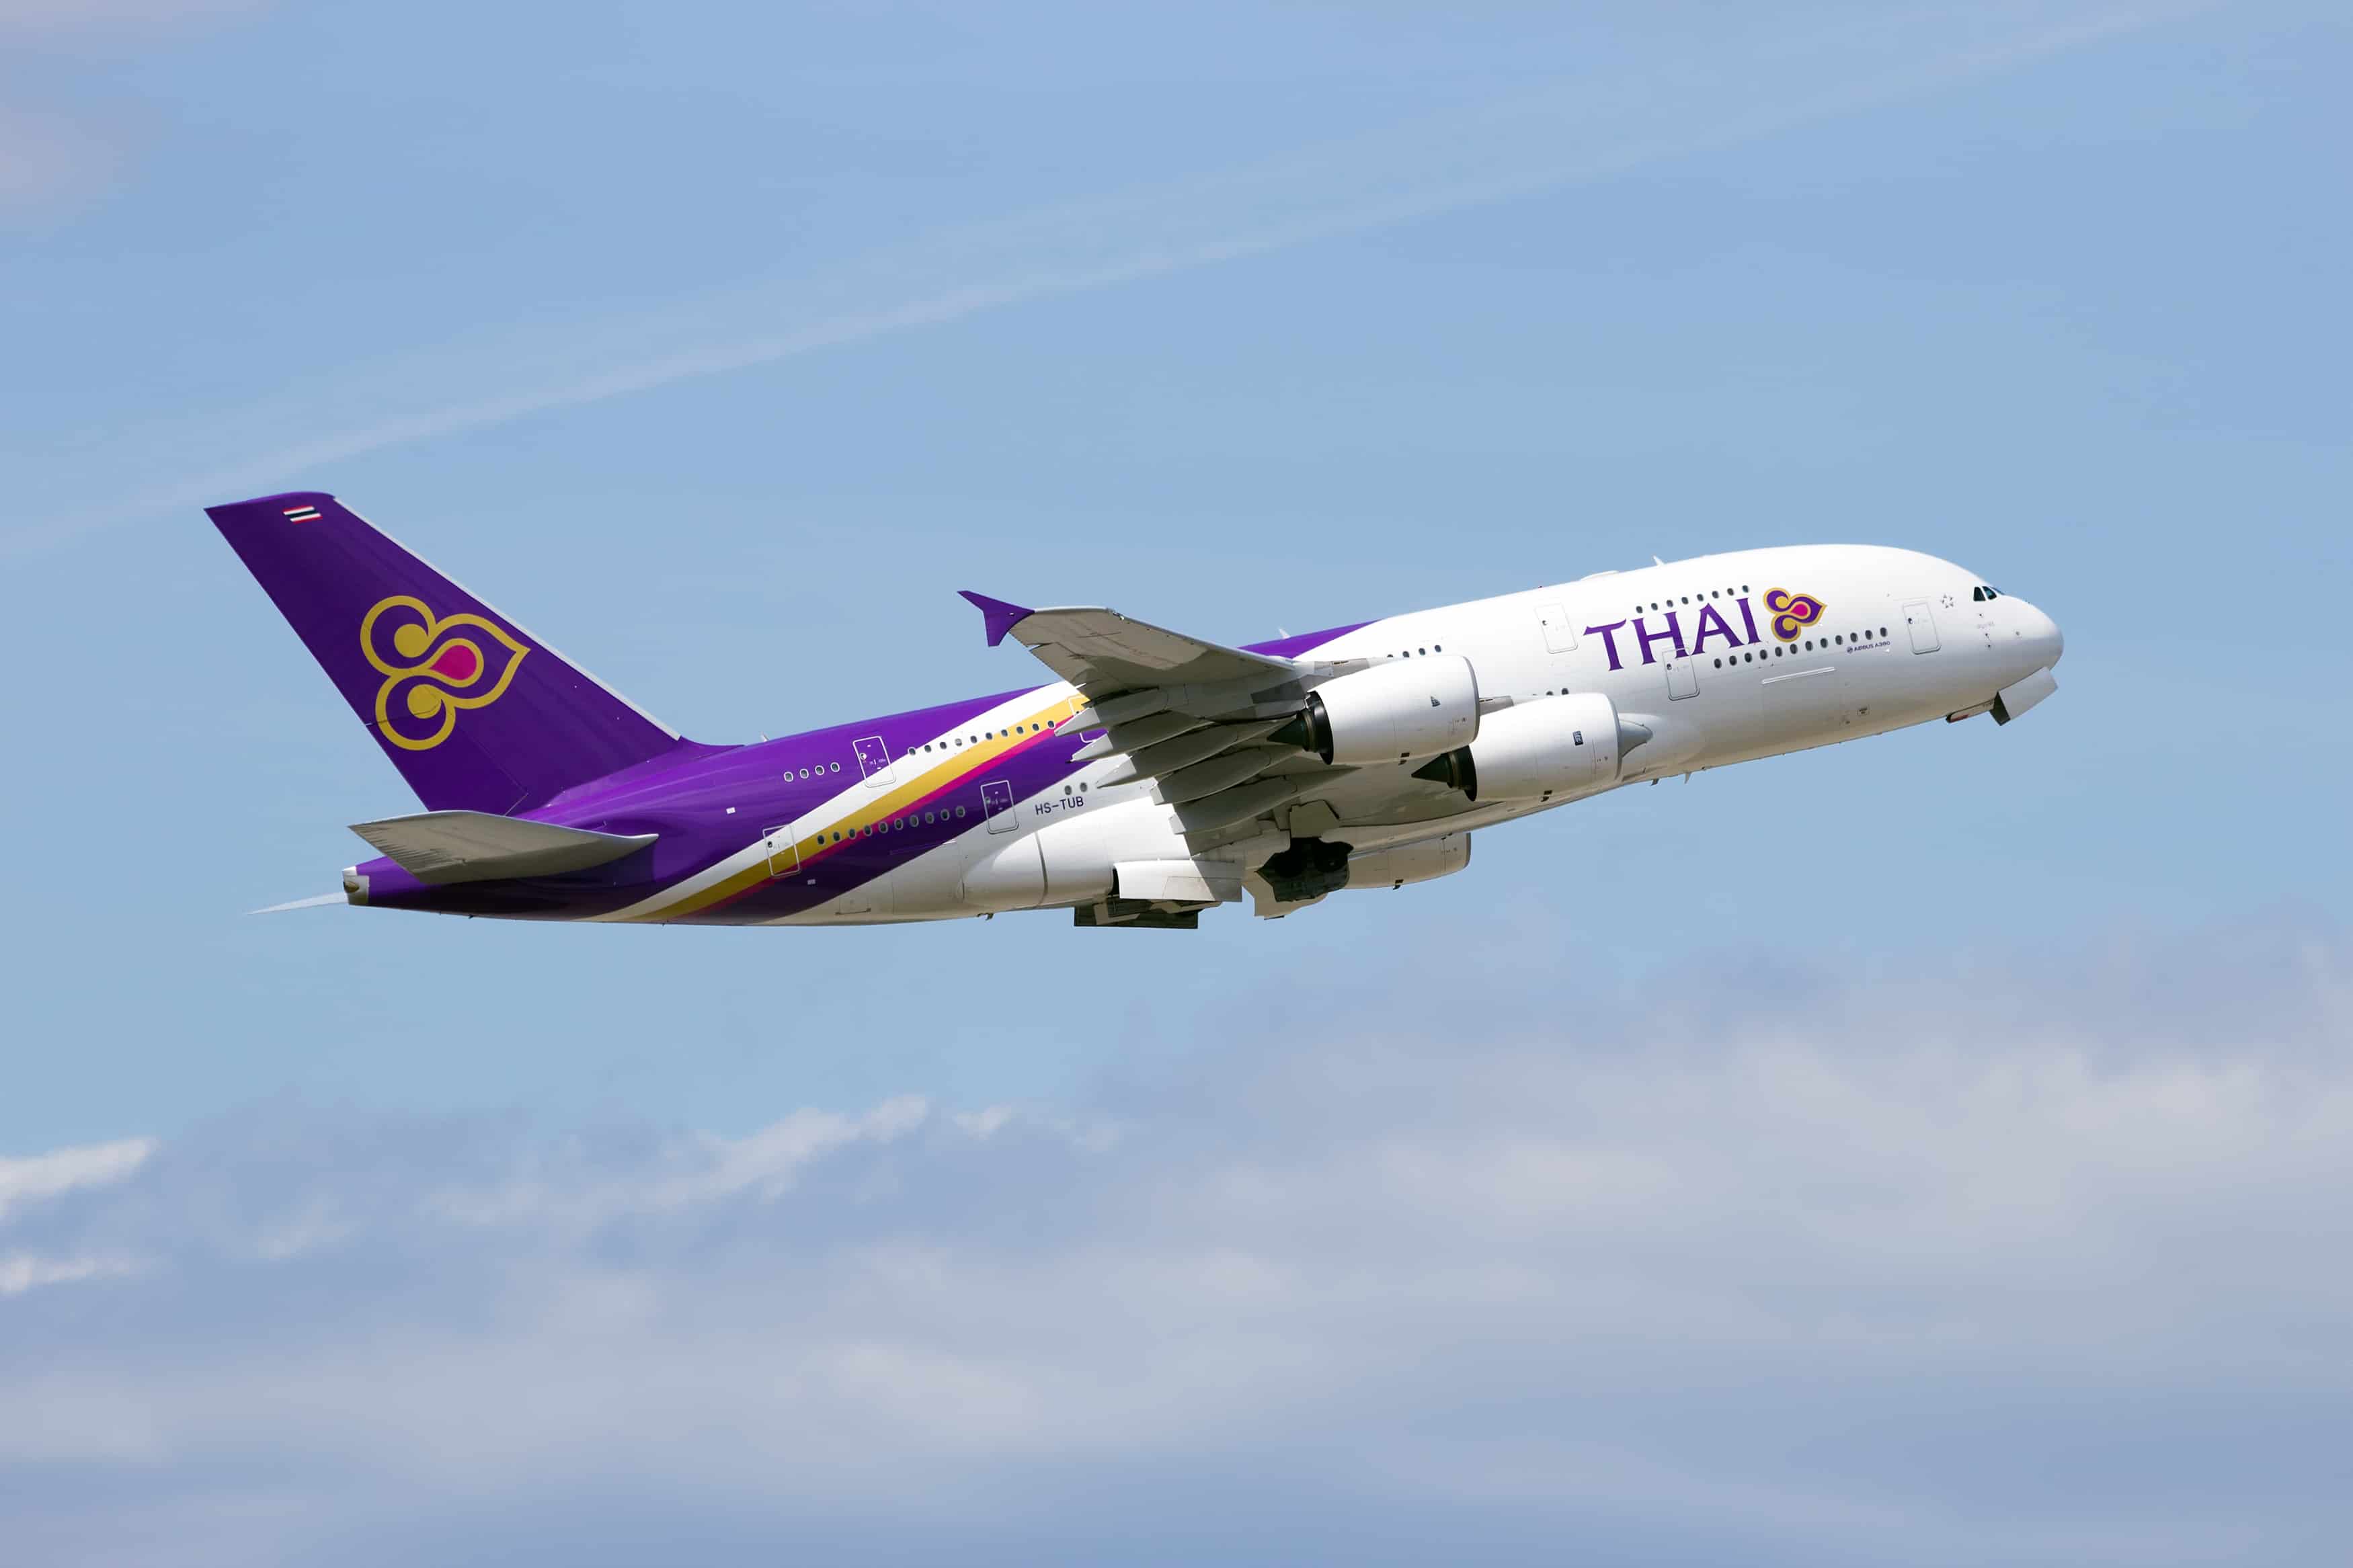 FRANKFURT, GERMANY - JULY 11: A Thai Airways Airbus A380 take off on July 11, 2013 in Frankfurt, Germany. Thai Airways has six Airbus A380's, the last due for delivery by summer 2013